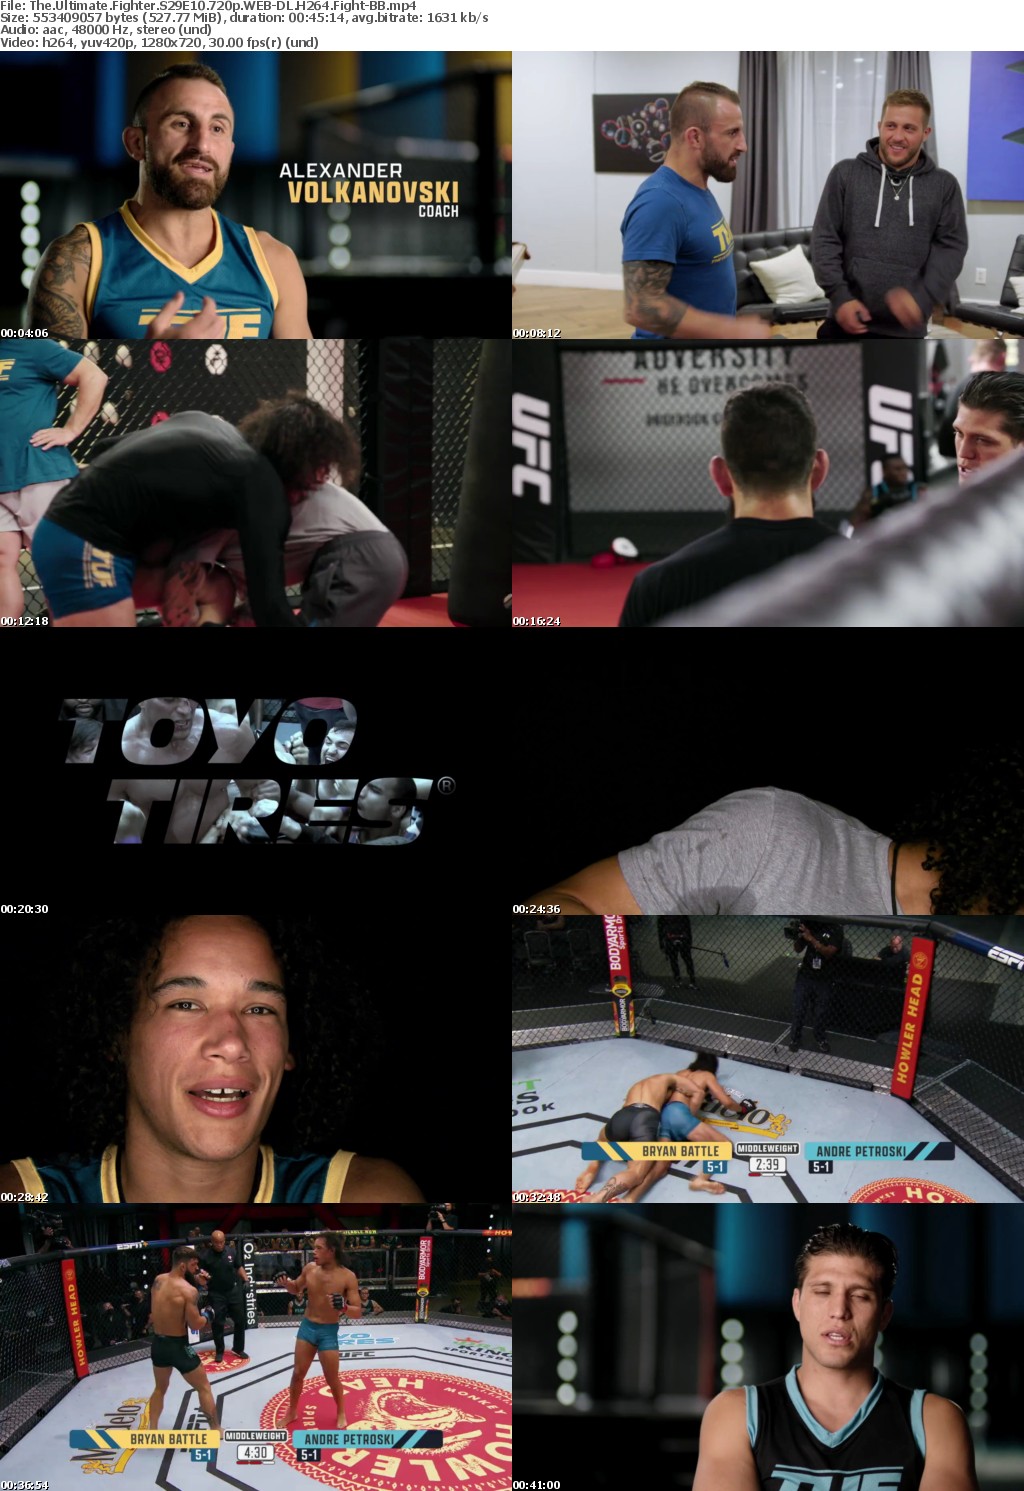 The Ultimate Fighter S29E10 720p WEB-DL H264 Fight-BB